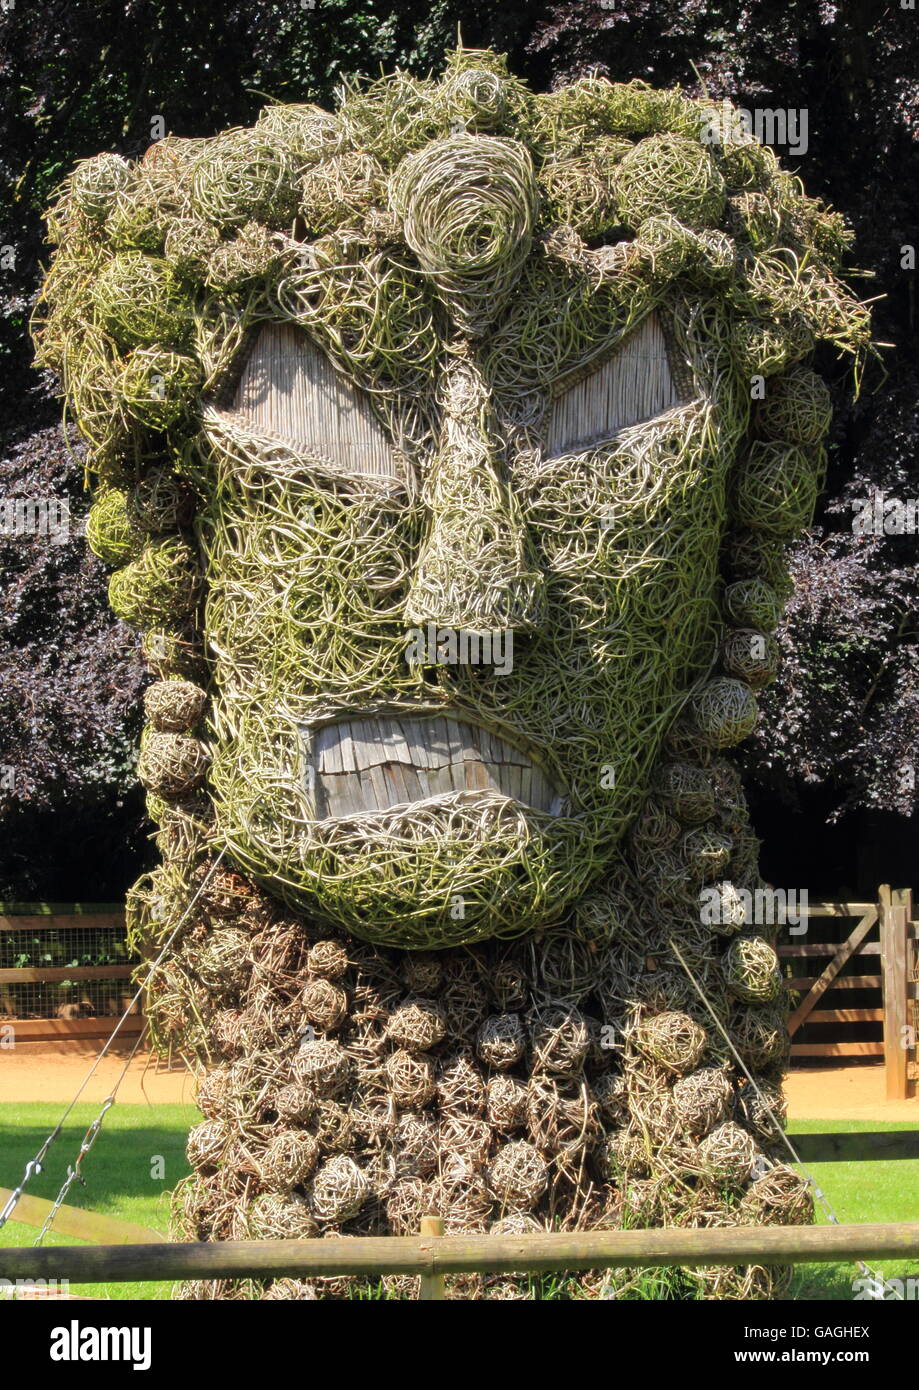 The Wicker Man Cotswold Wildlife Park Banque D'Images